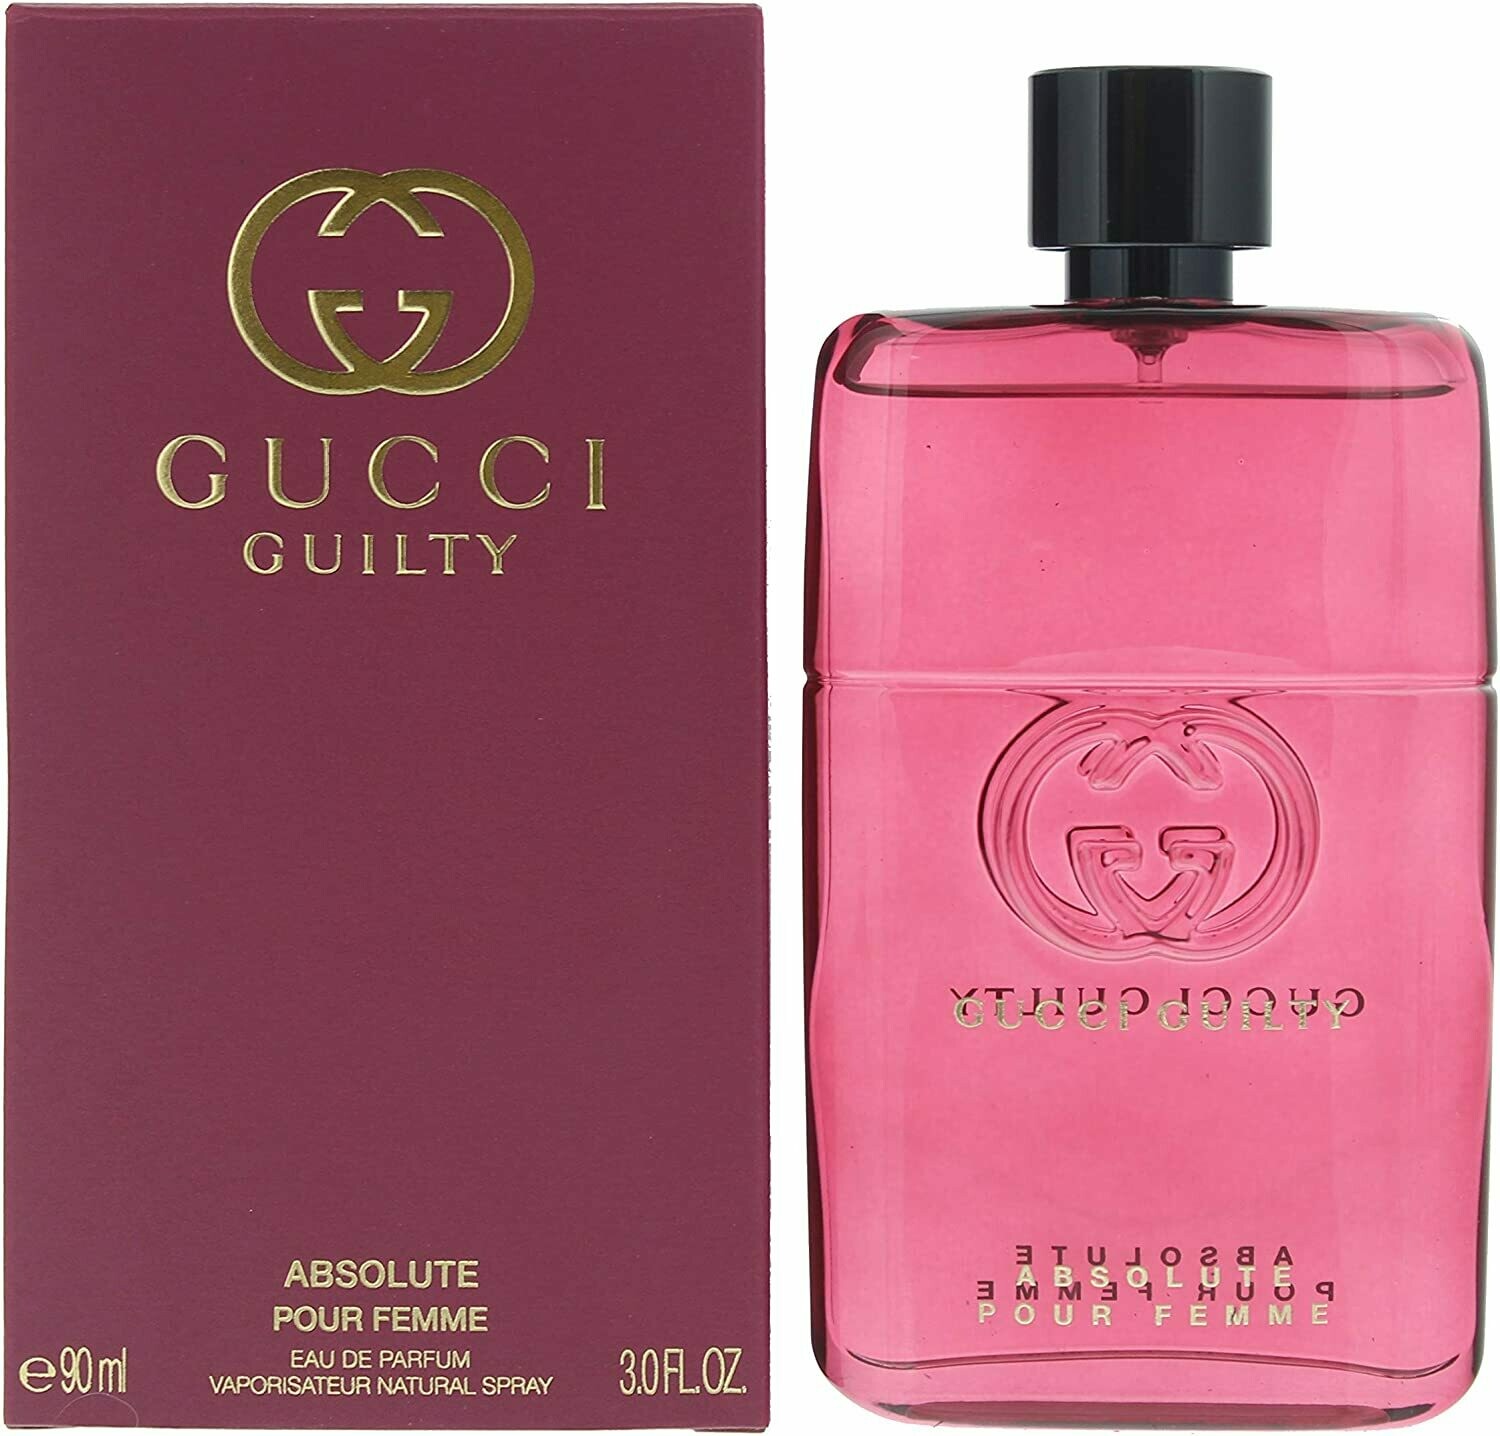 GUCCI GUILTY ABSOLUTE FEMME 90 ML